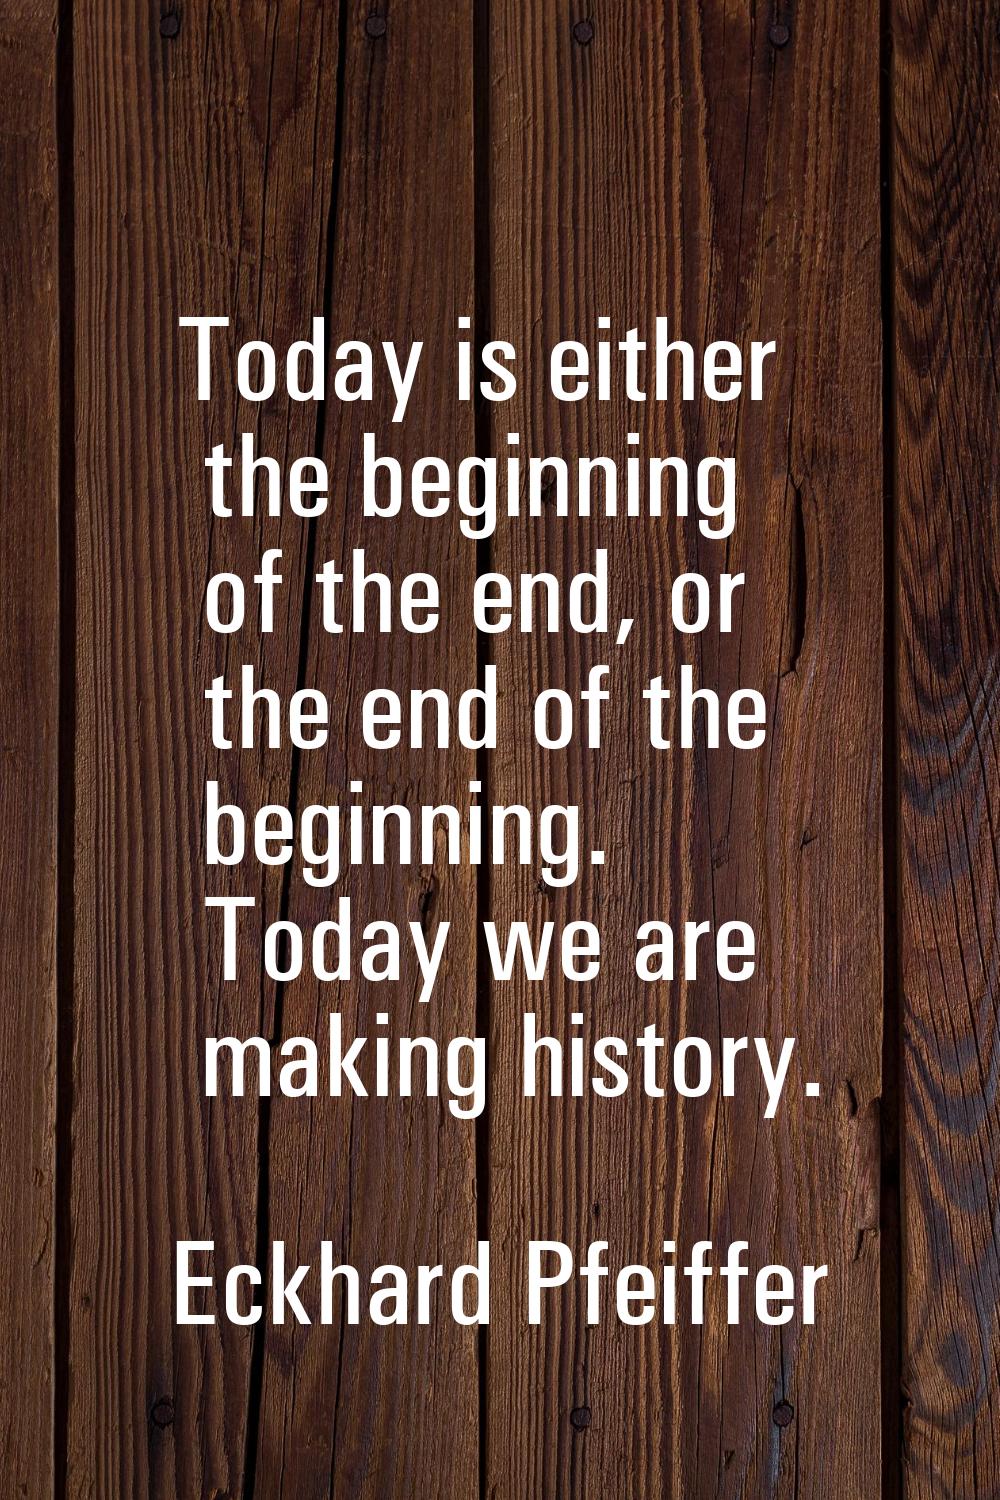 Today is either the beginning of the end, or the end of the beginning. Today we are making history.